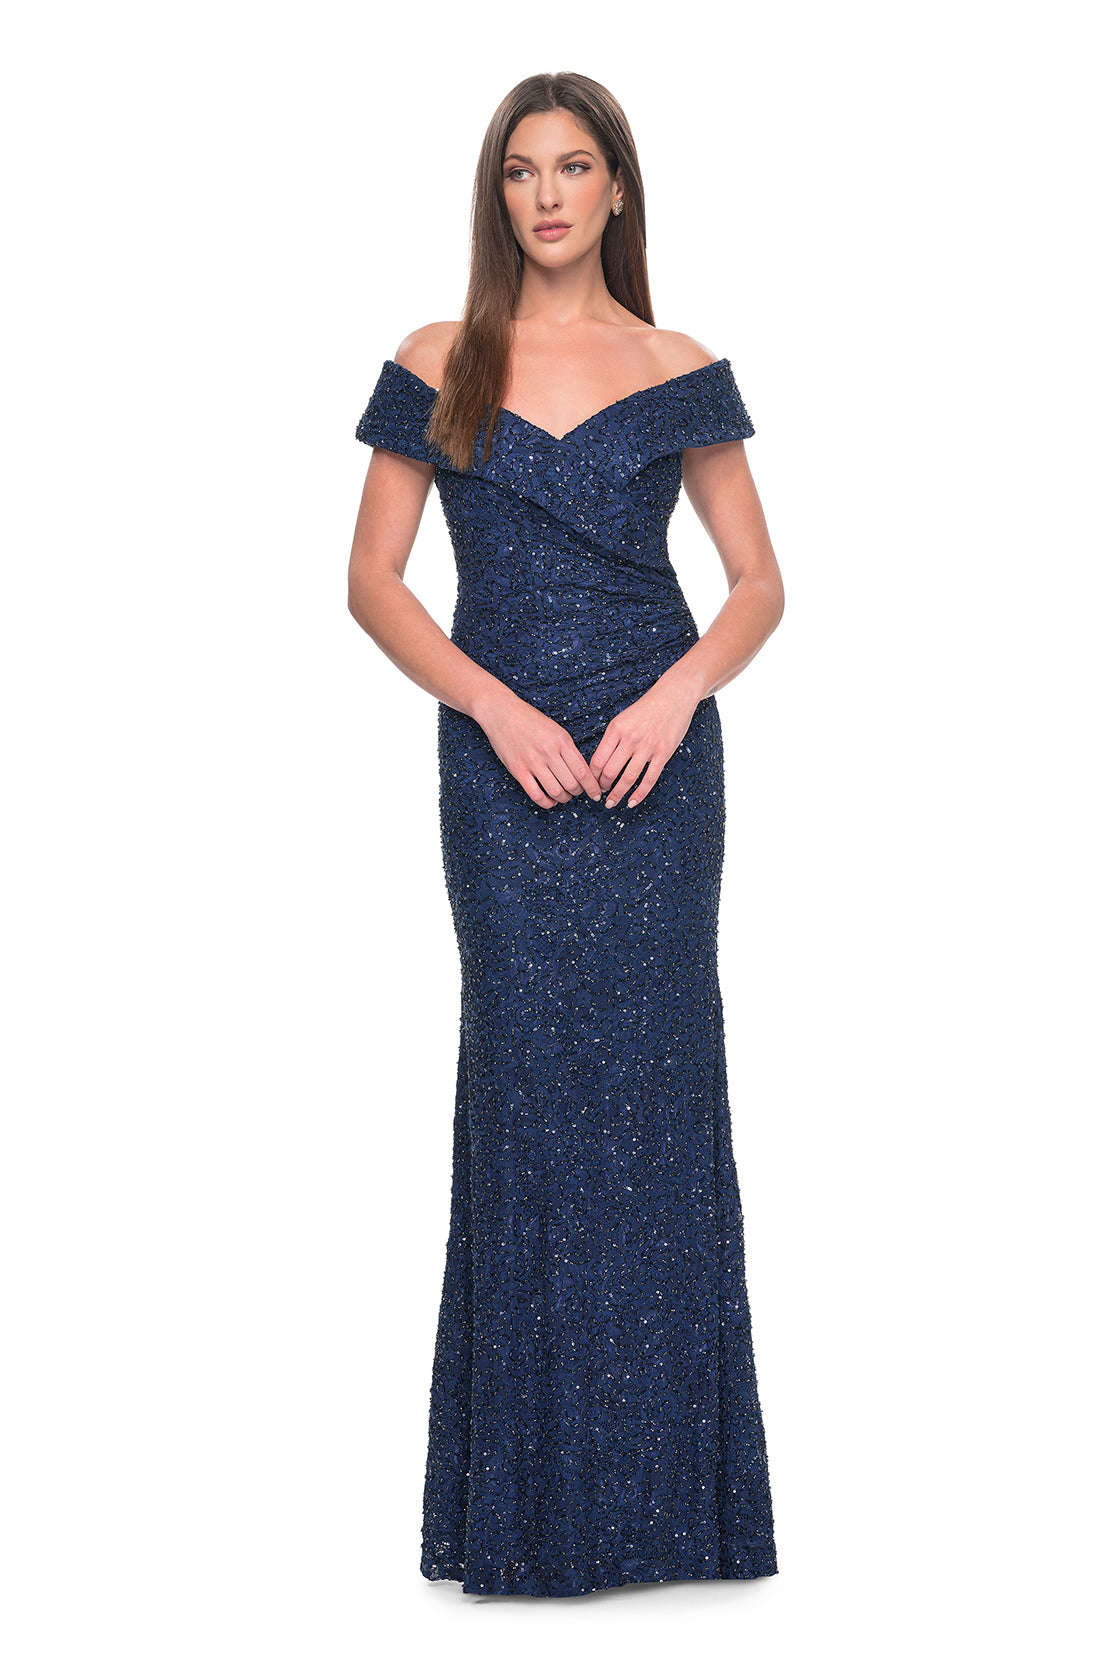 La Femme 31679 Enchanting Beaded Lace Off-the-Shoulder Evening Gown - A breathtaking ensemble featuring intricate beaded lace, off-the-shoulder design, ruching details, and a flattering V neckline for a look of timeless elegance.  The model is wearing the dress in the color navy.  Front View.